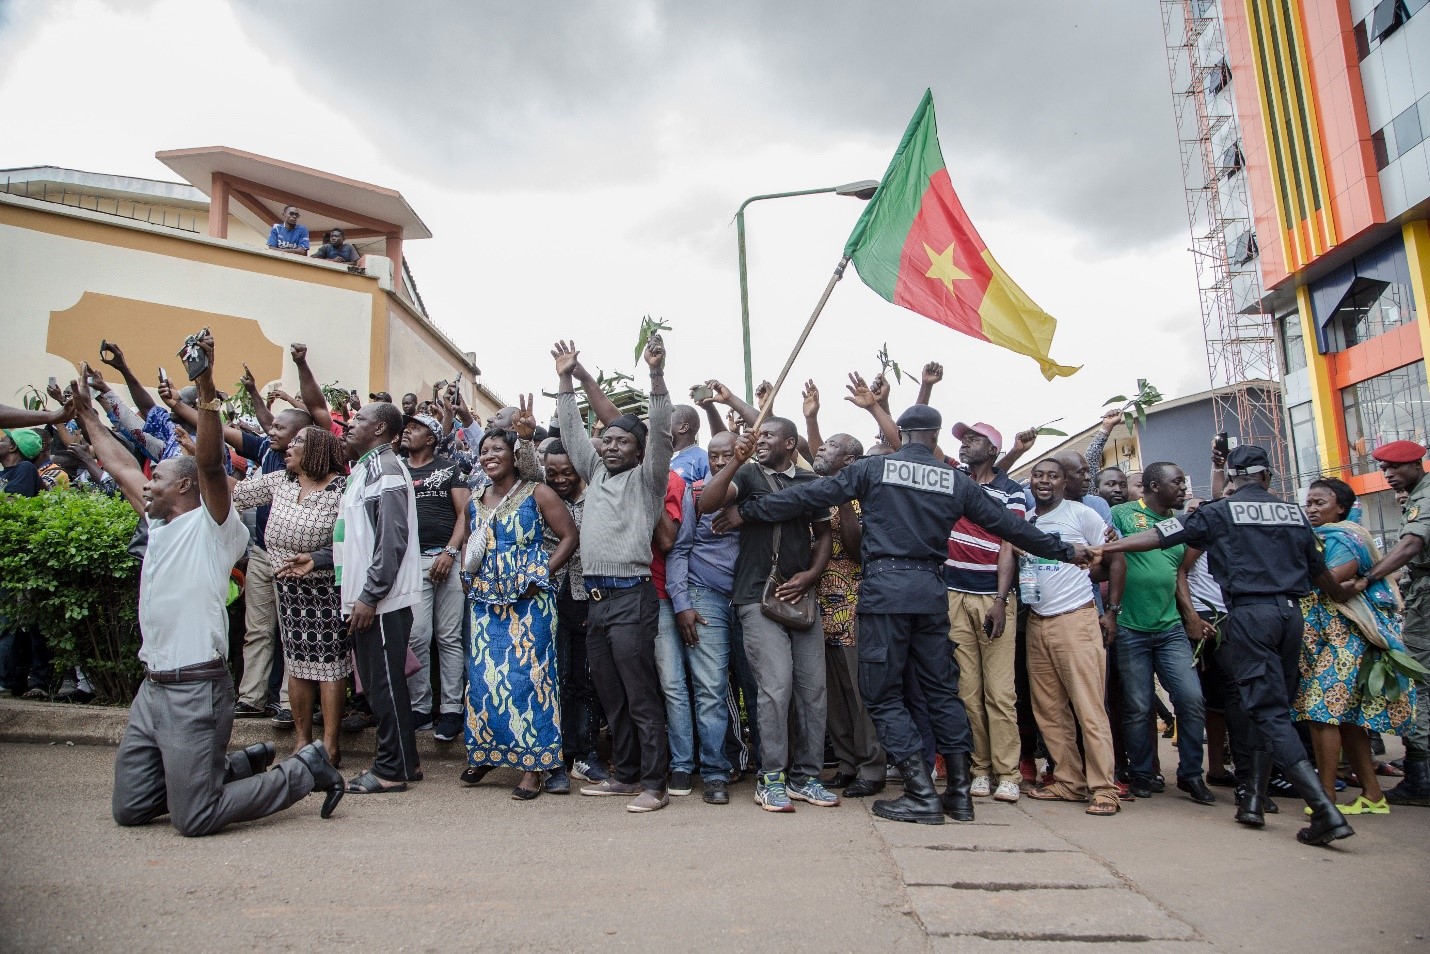 Hundreds of supporters raise their arms and wave the national flag while waiting to greet the Cameroonian opposition leader Maurice Kamto in Yaoundé on Oct. 5, the day of his release from prison. STRINGER/AFP via Getty Images